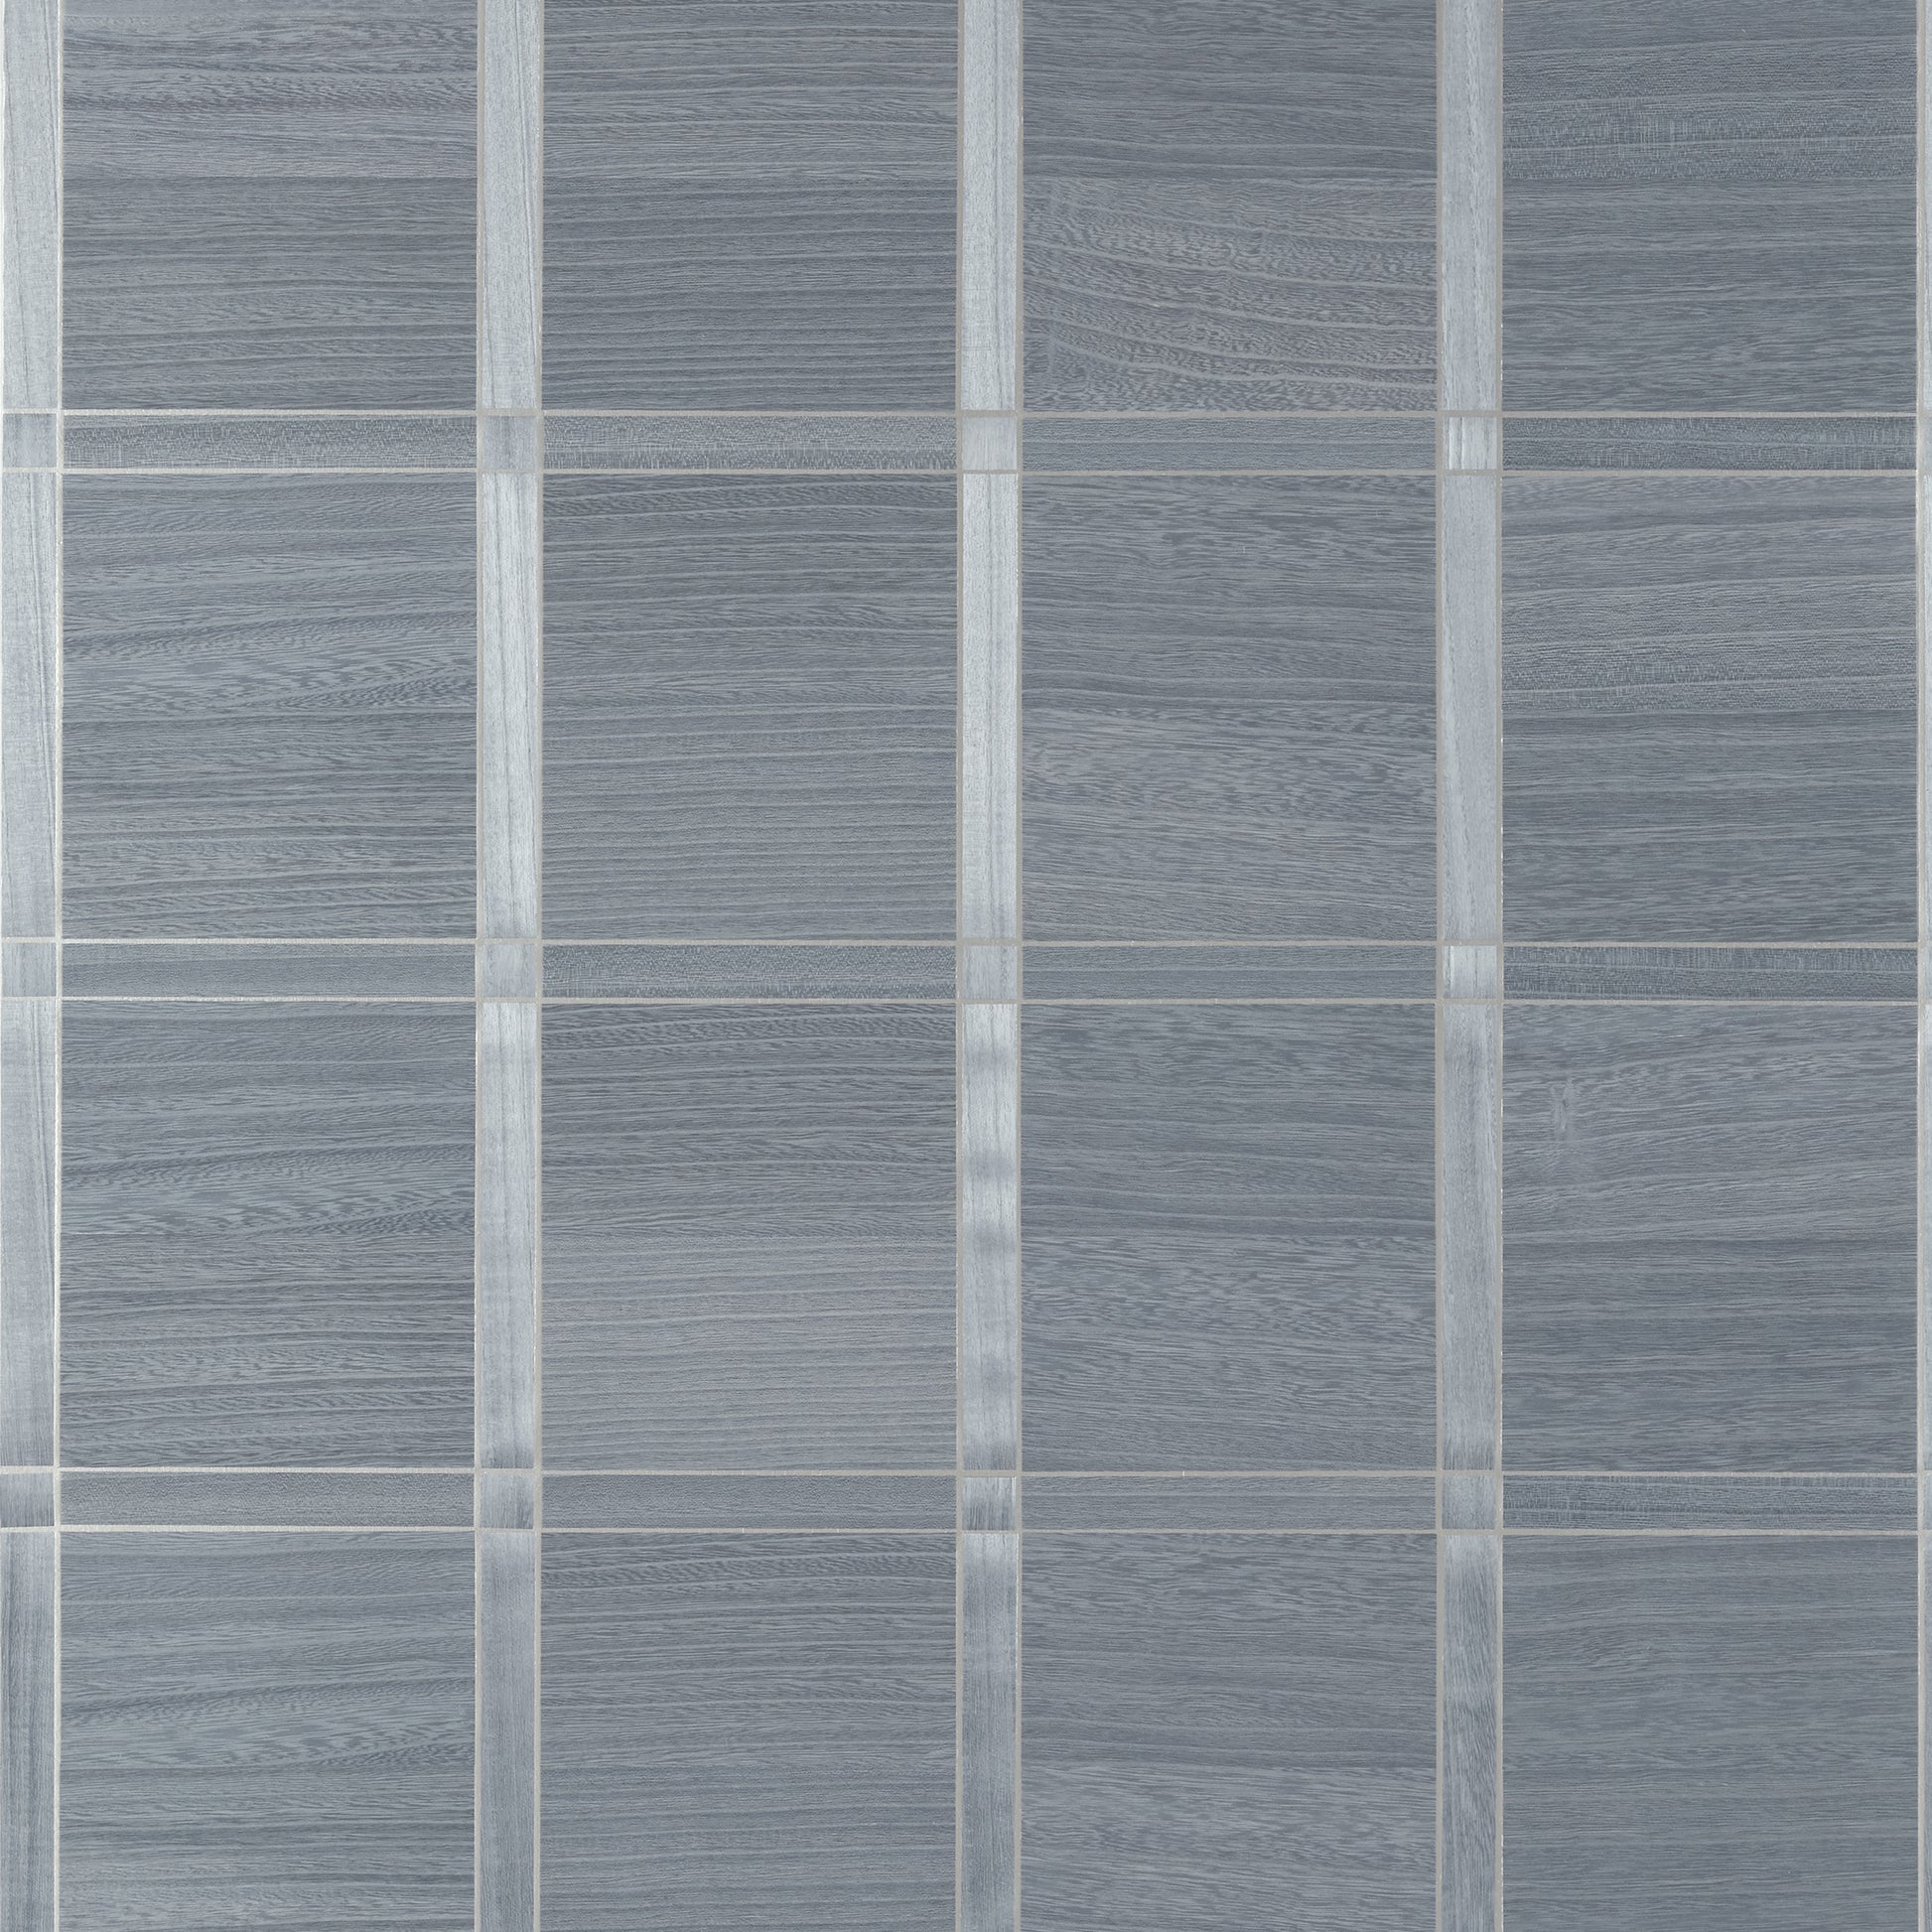 Purchase Thibaut Wallpaper SKU T41004 pattern name Wood Panel color Cadet and Metallic Pewter. 